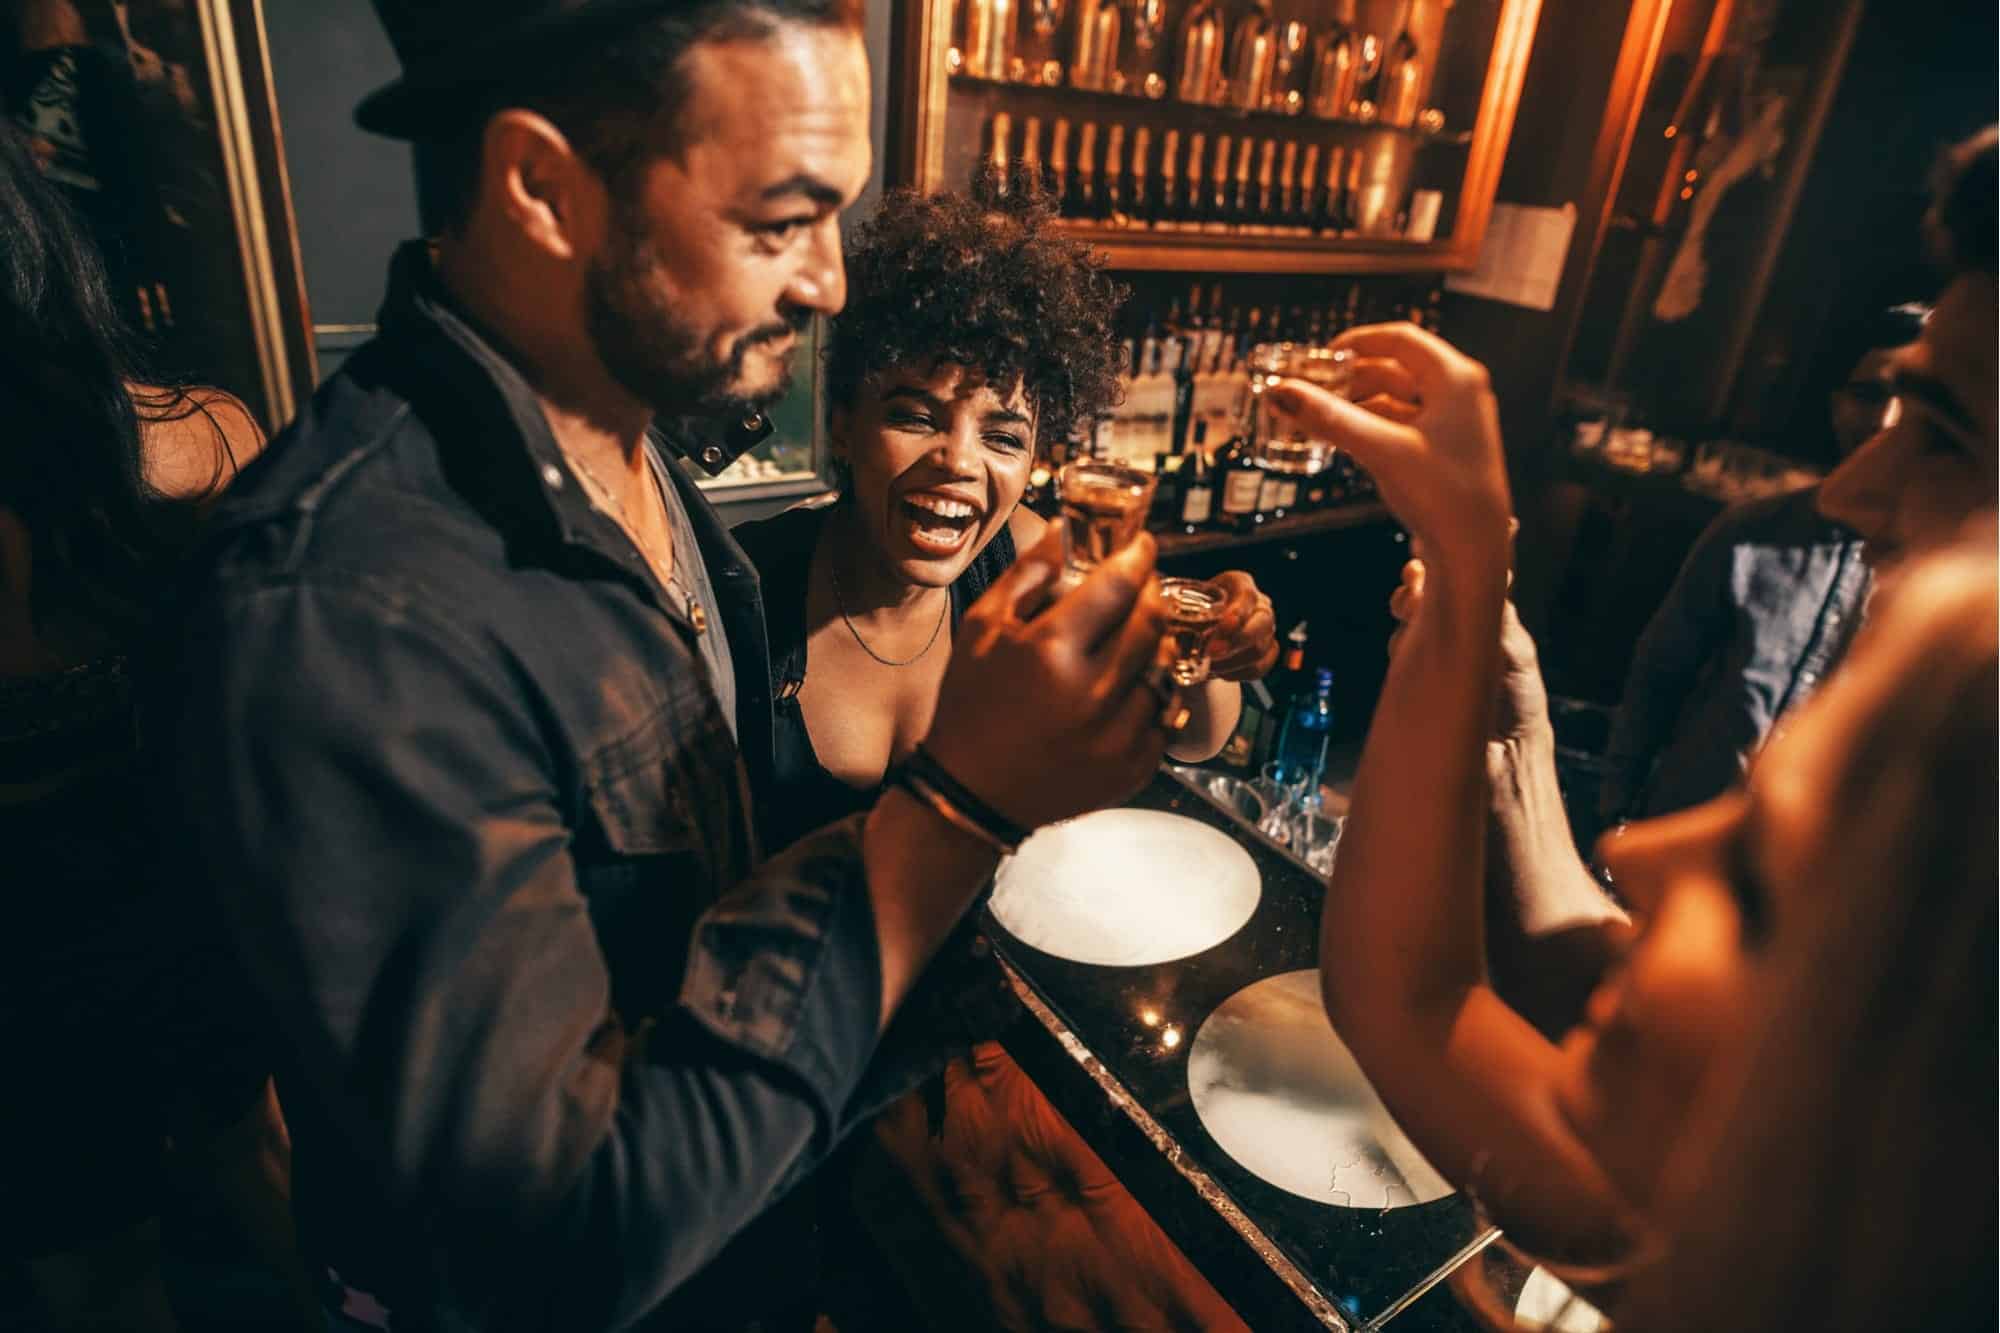 What are the Skills Needed to Be a Good Bartender